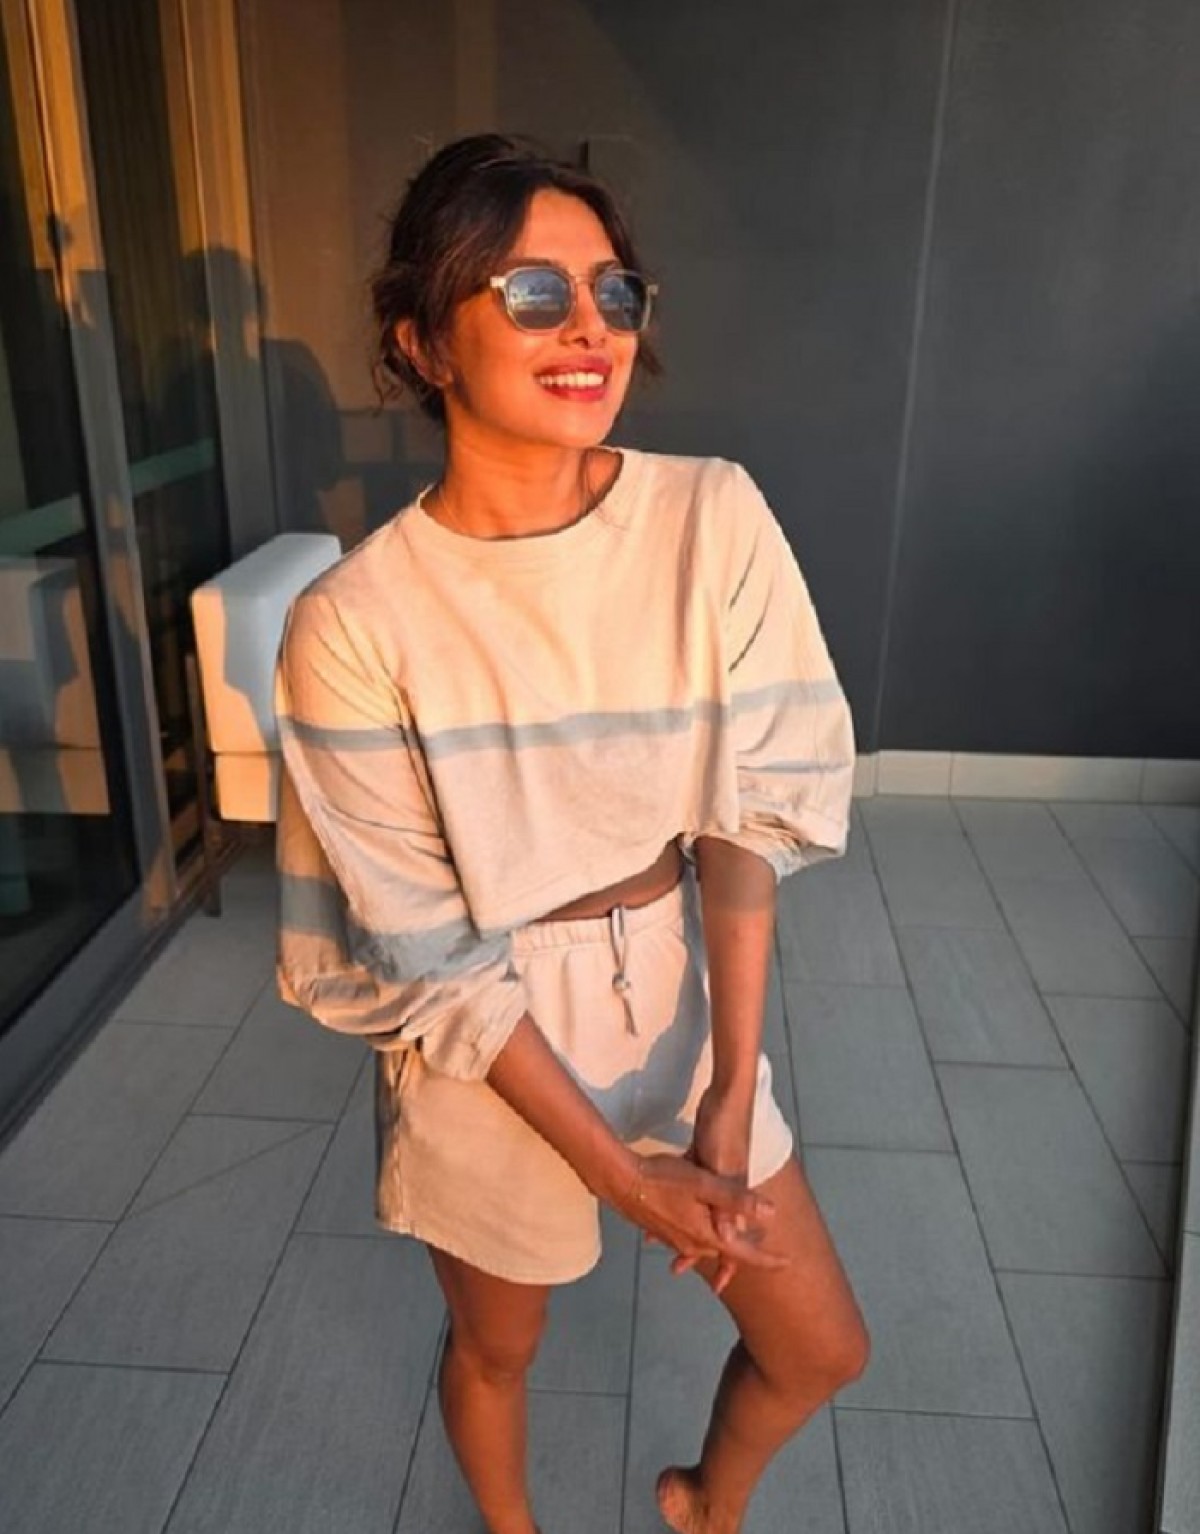 Priyanka Chopra was seen enjoying the sunset in the balcony of her house, the actress shone like gold as the sun shined